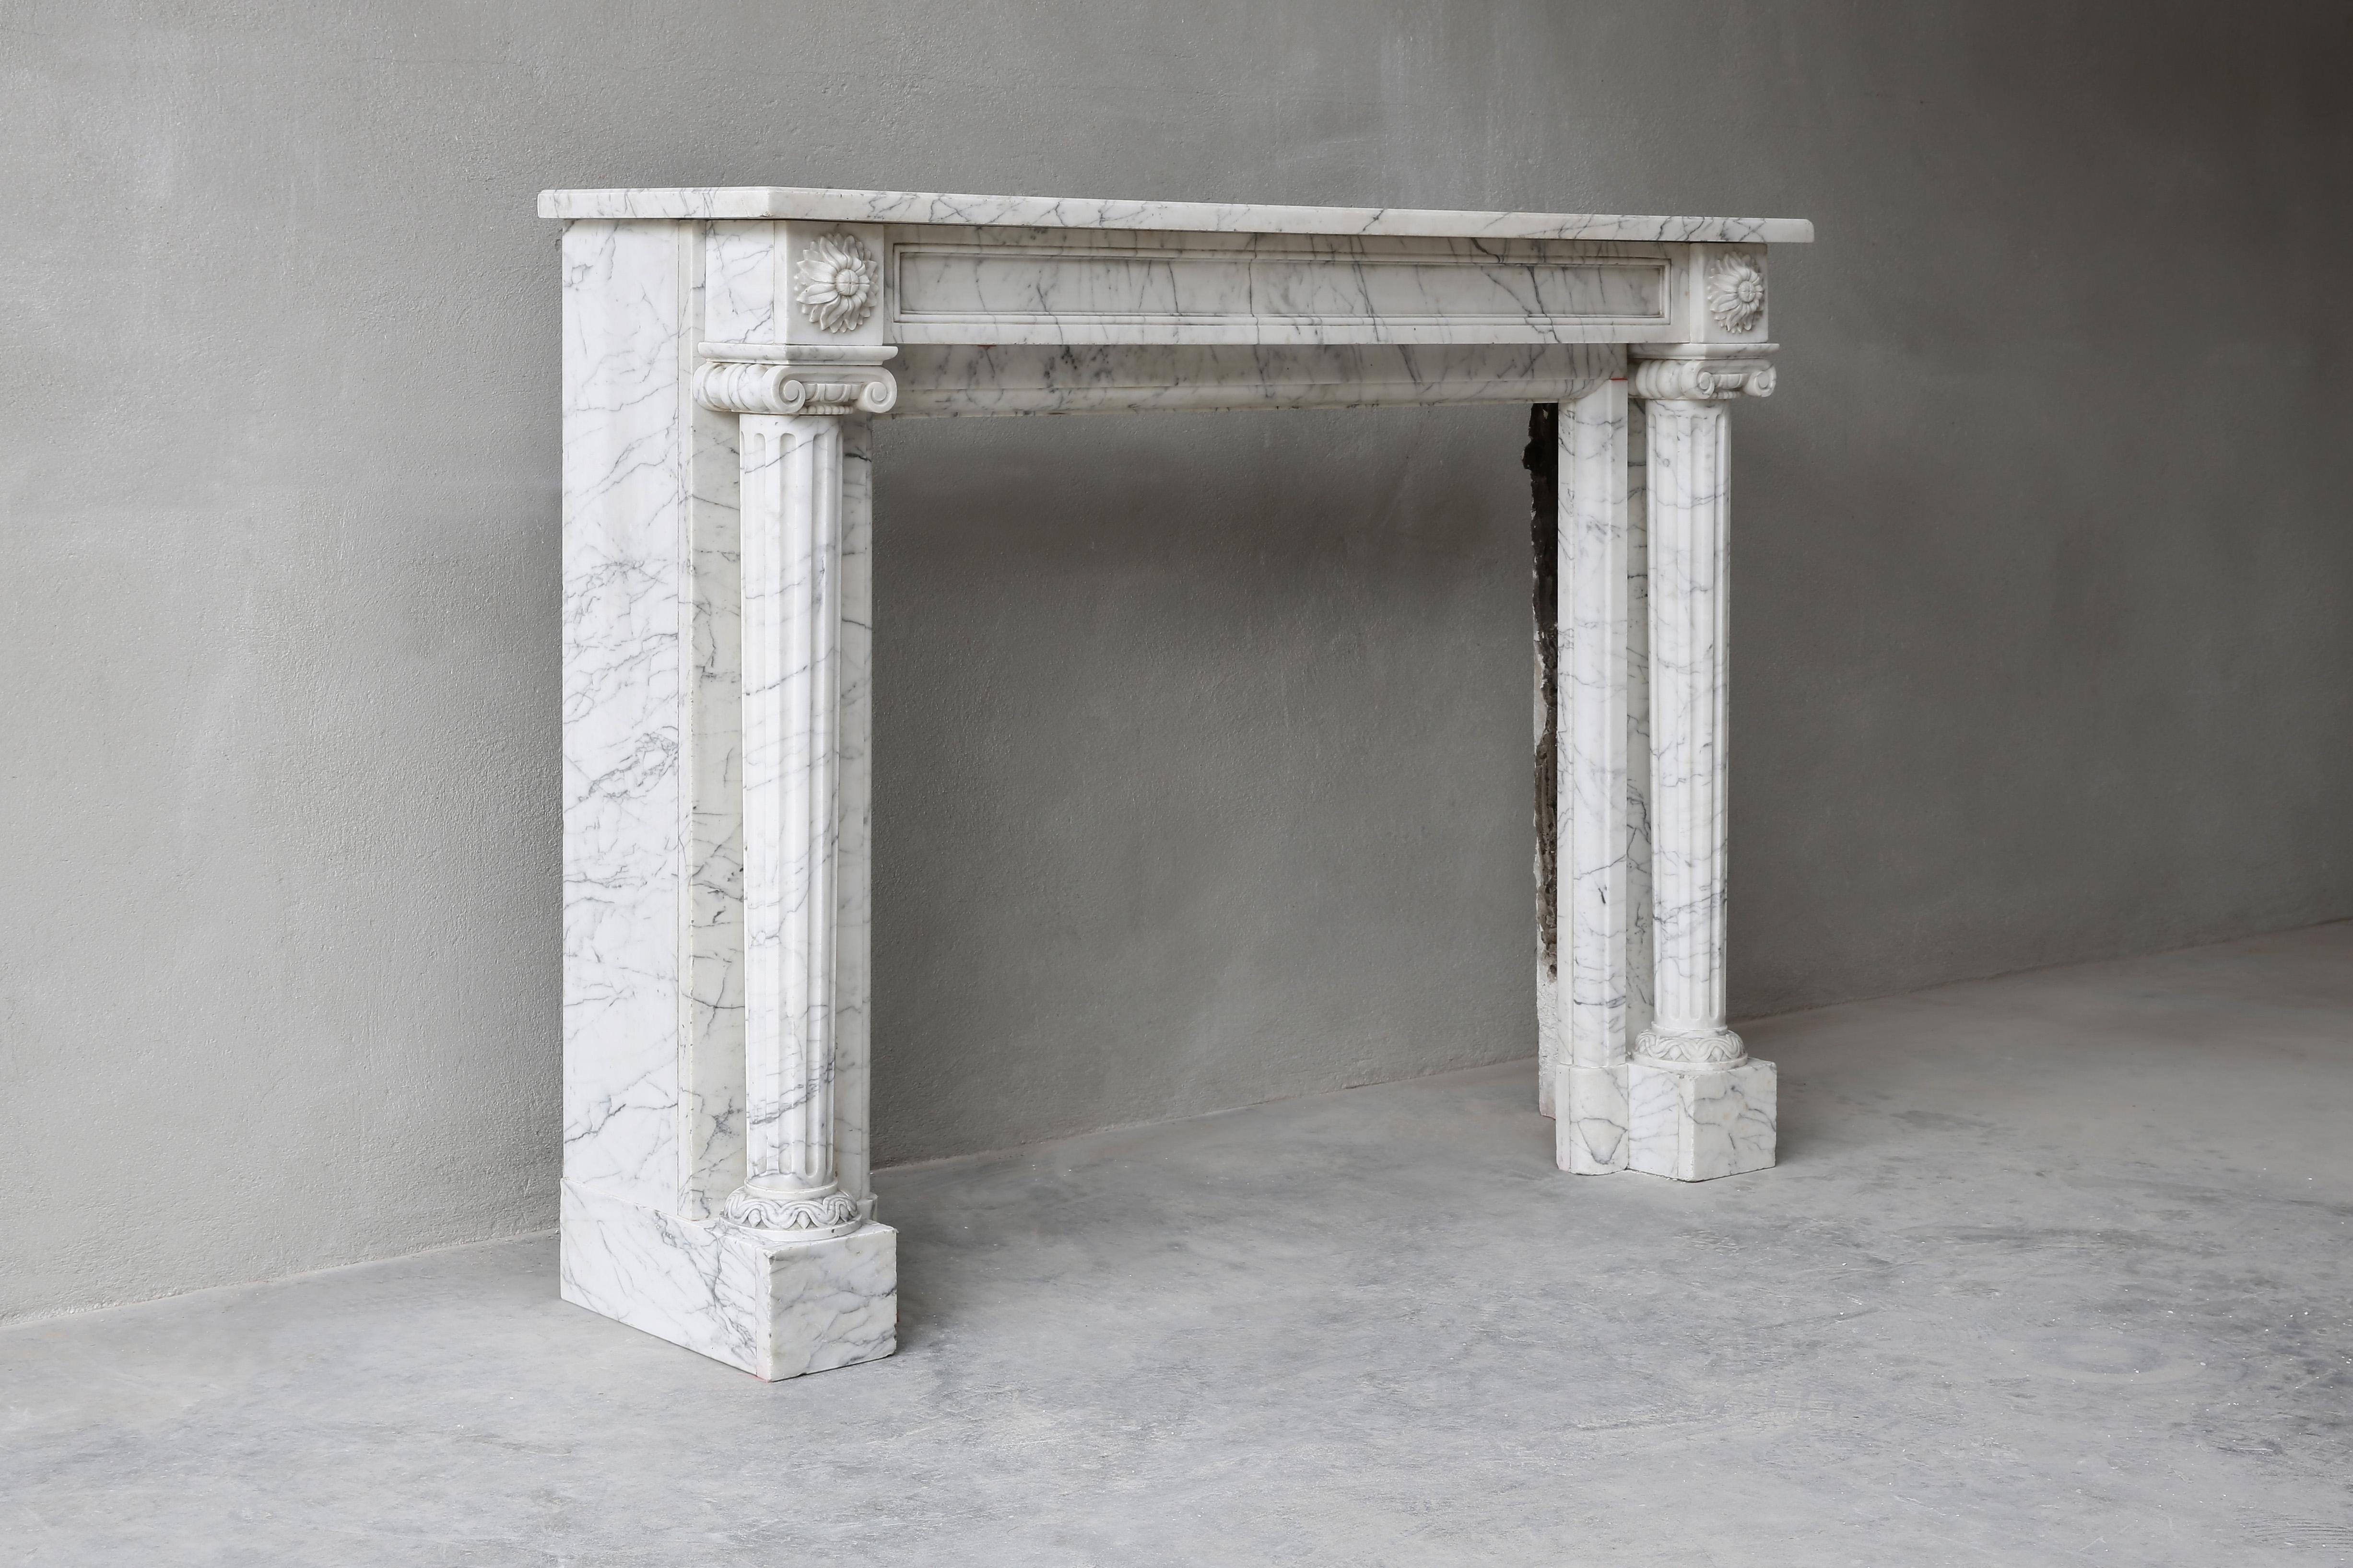 Beautiful antique fireplace in Carrara marble from the 19th century! This fireplace is in Louis XVI style and comes from Paris. The mantelpiece has charming ornaments and decorations and the legs are fluted. A beautiful model fireplace that fits